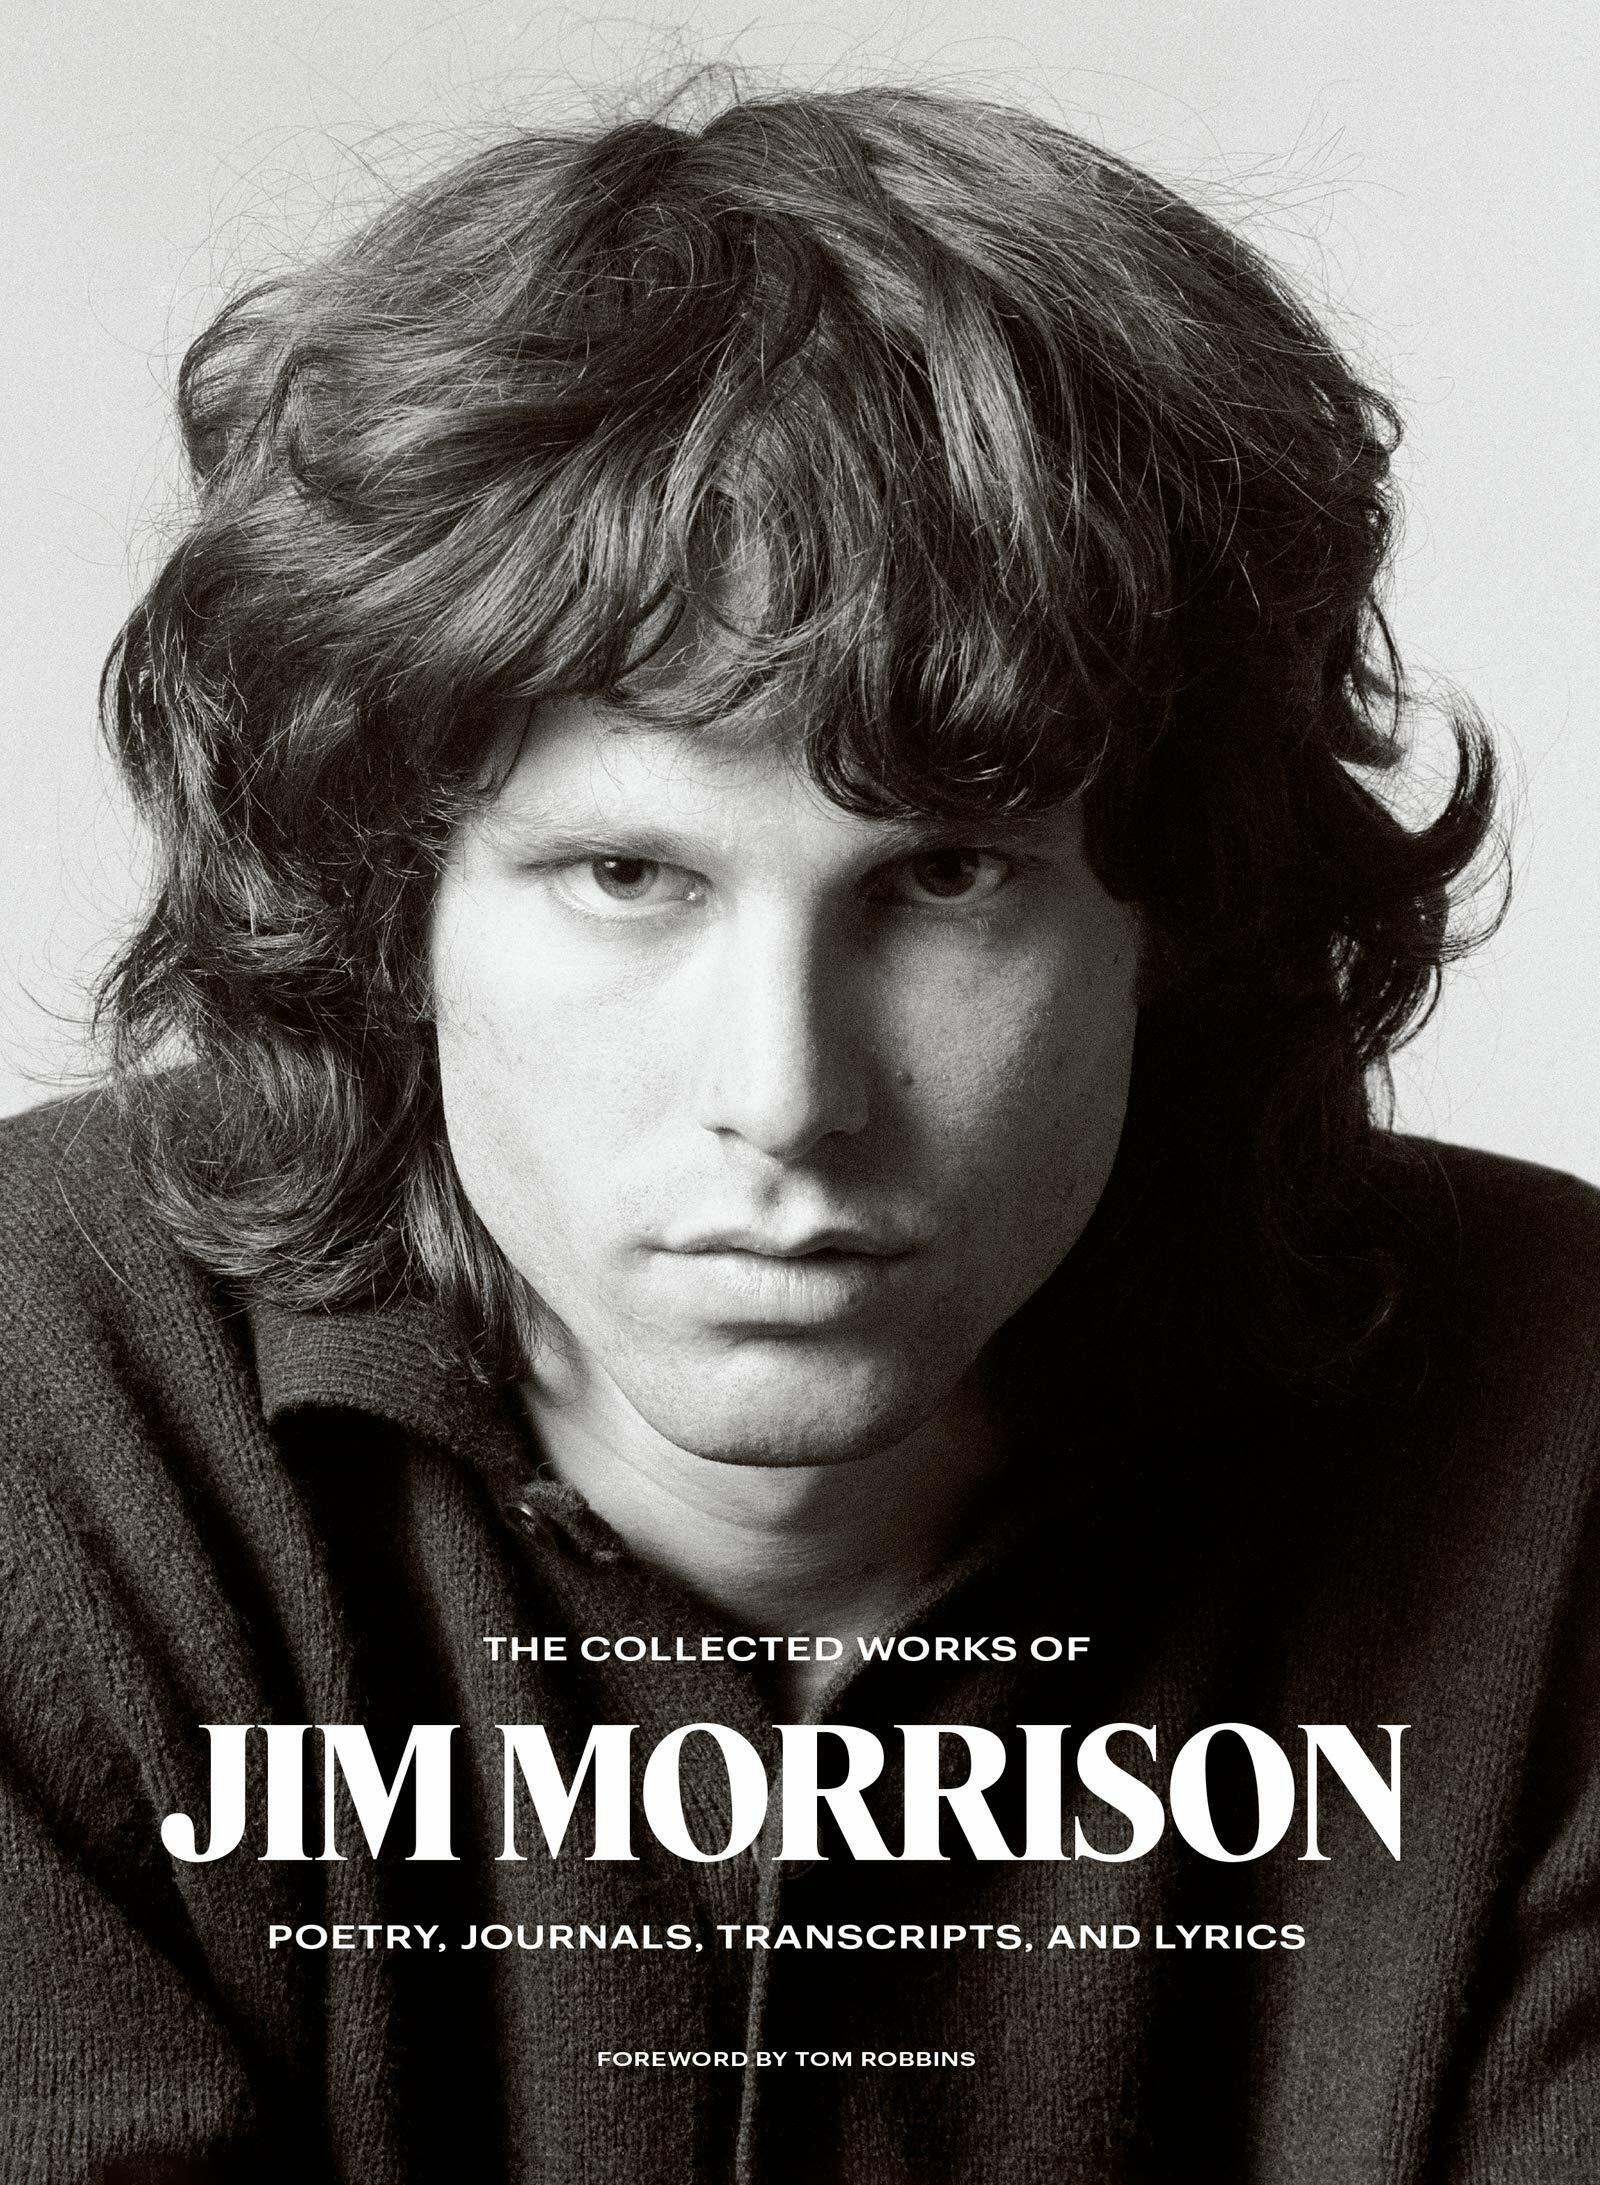 The Collected Works of Jim Morrison: Poetry, Journals, Transcripts, and Lyrics (Hardcover)